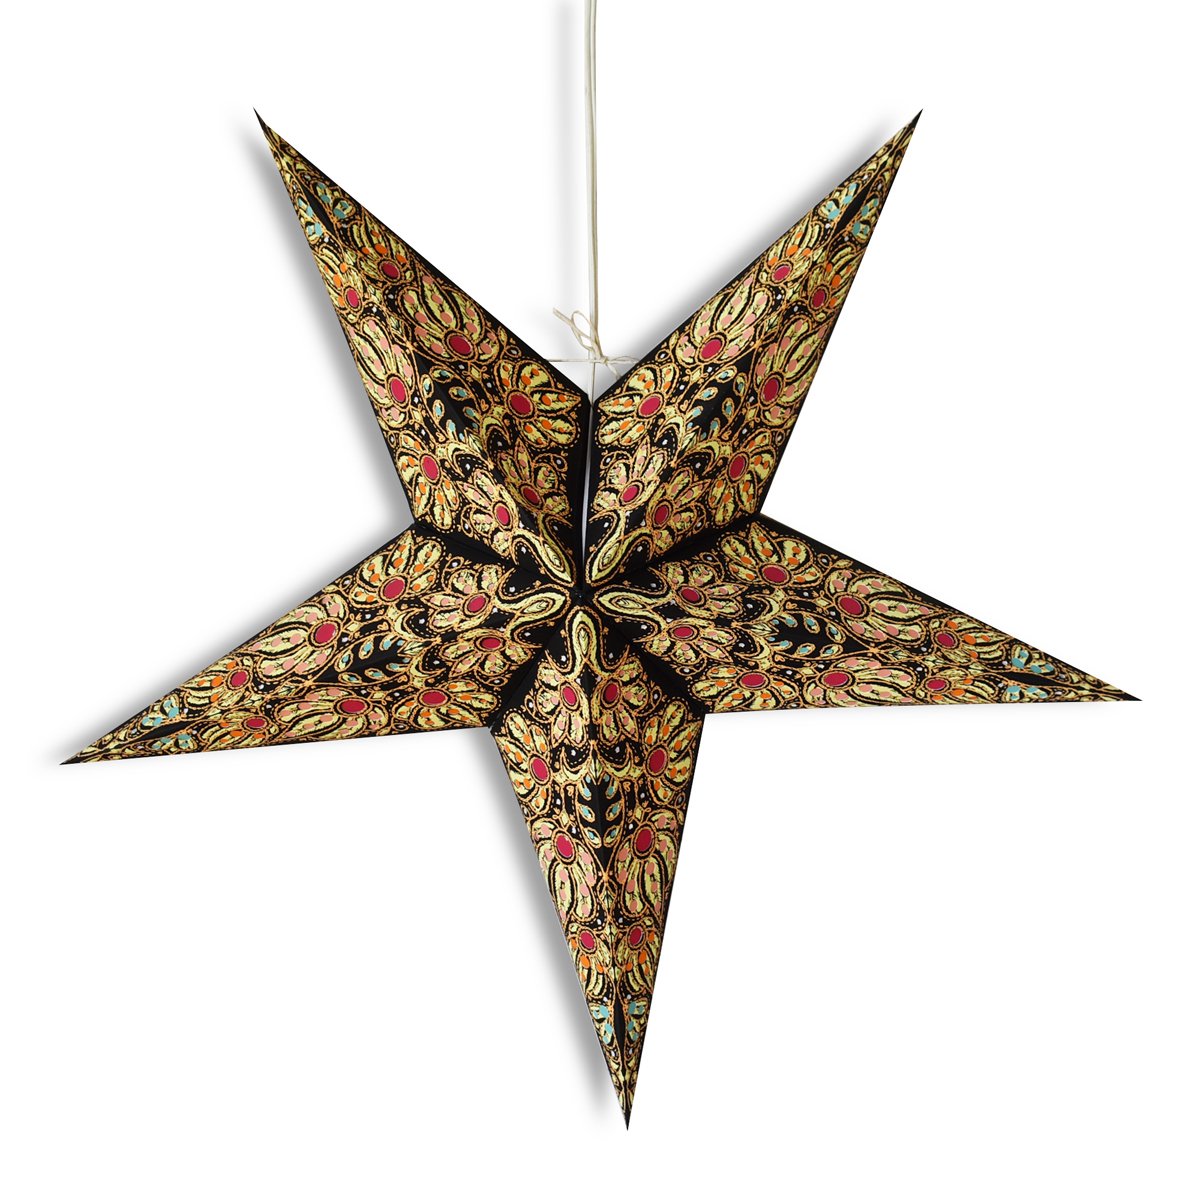 3-PACK + Cord | 24" Black / Gold Marine Paper Star Lantern and Lamp Cord Hanging Decoration - AsianImportStore.com - B2B Wholesale Lighting and Decor